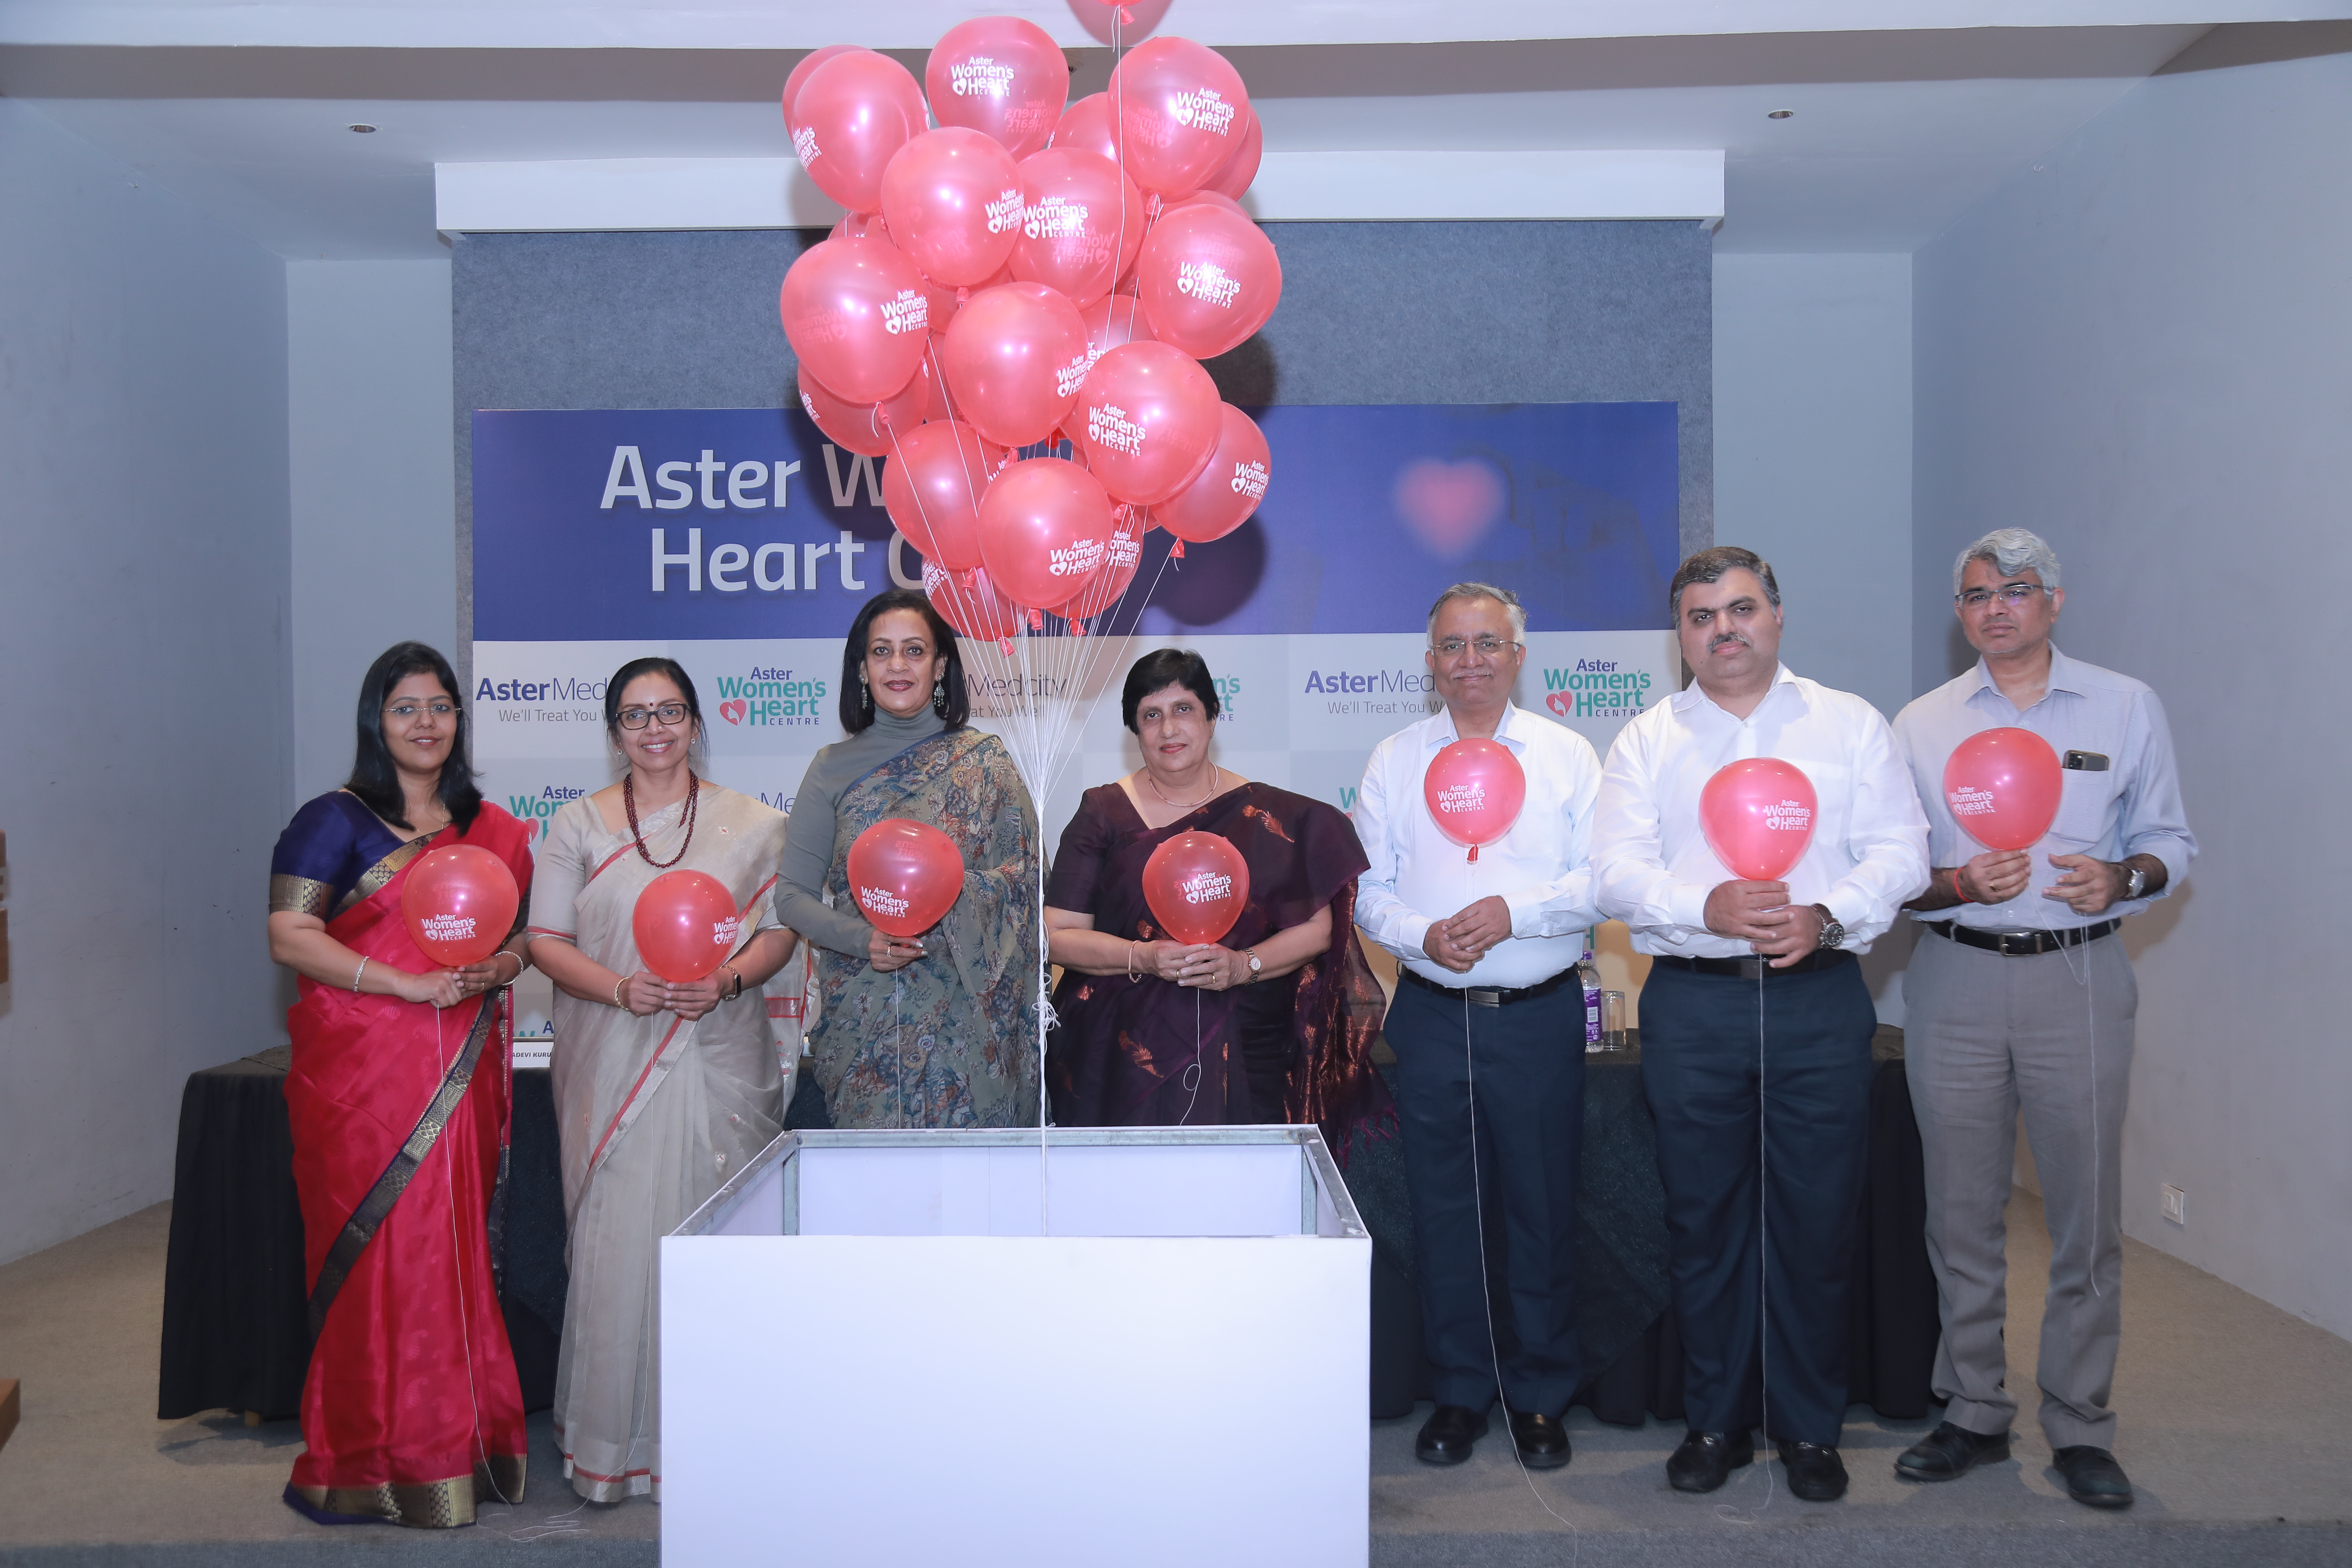 Aster Medcity Announces the Launch of Aster Women's Heart Centre to Empower Women's Heart Health